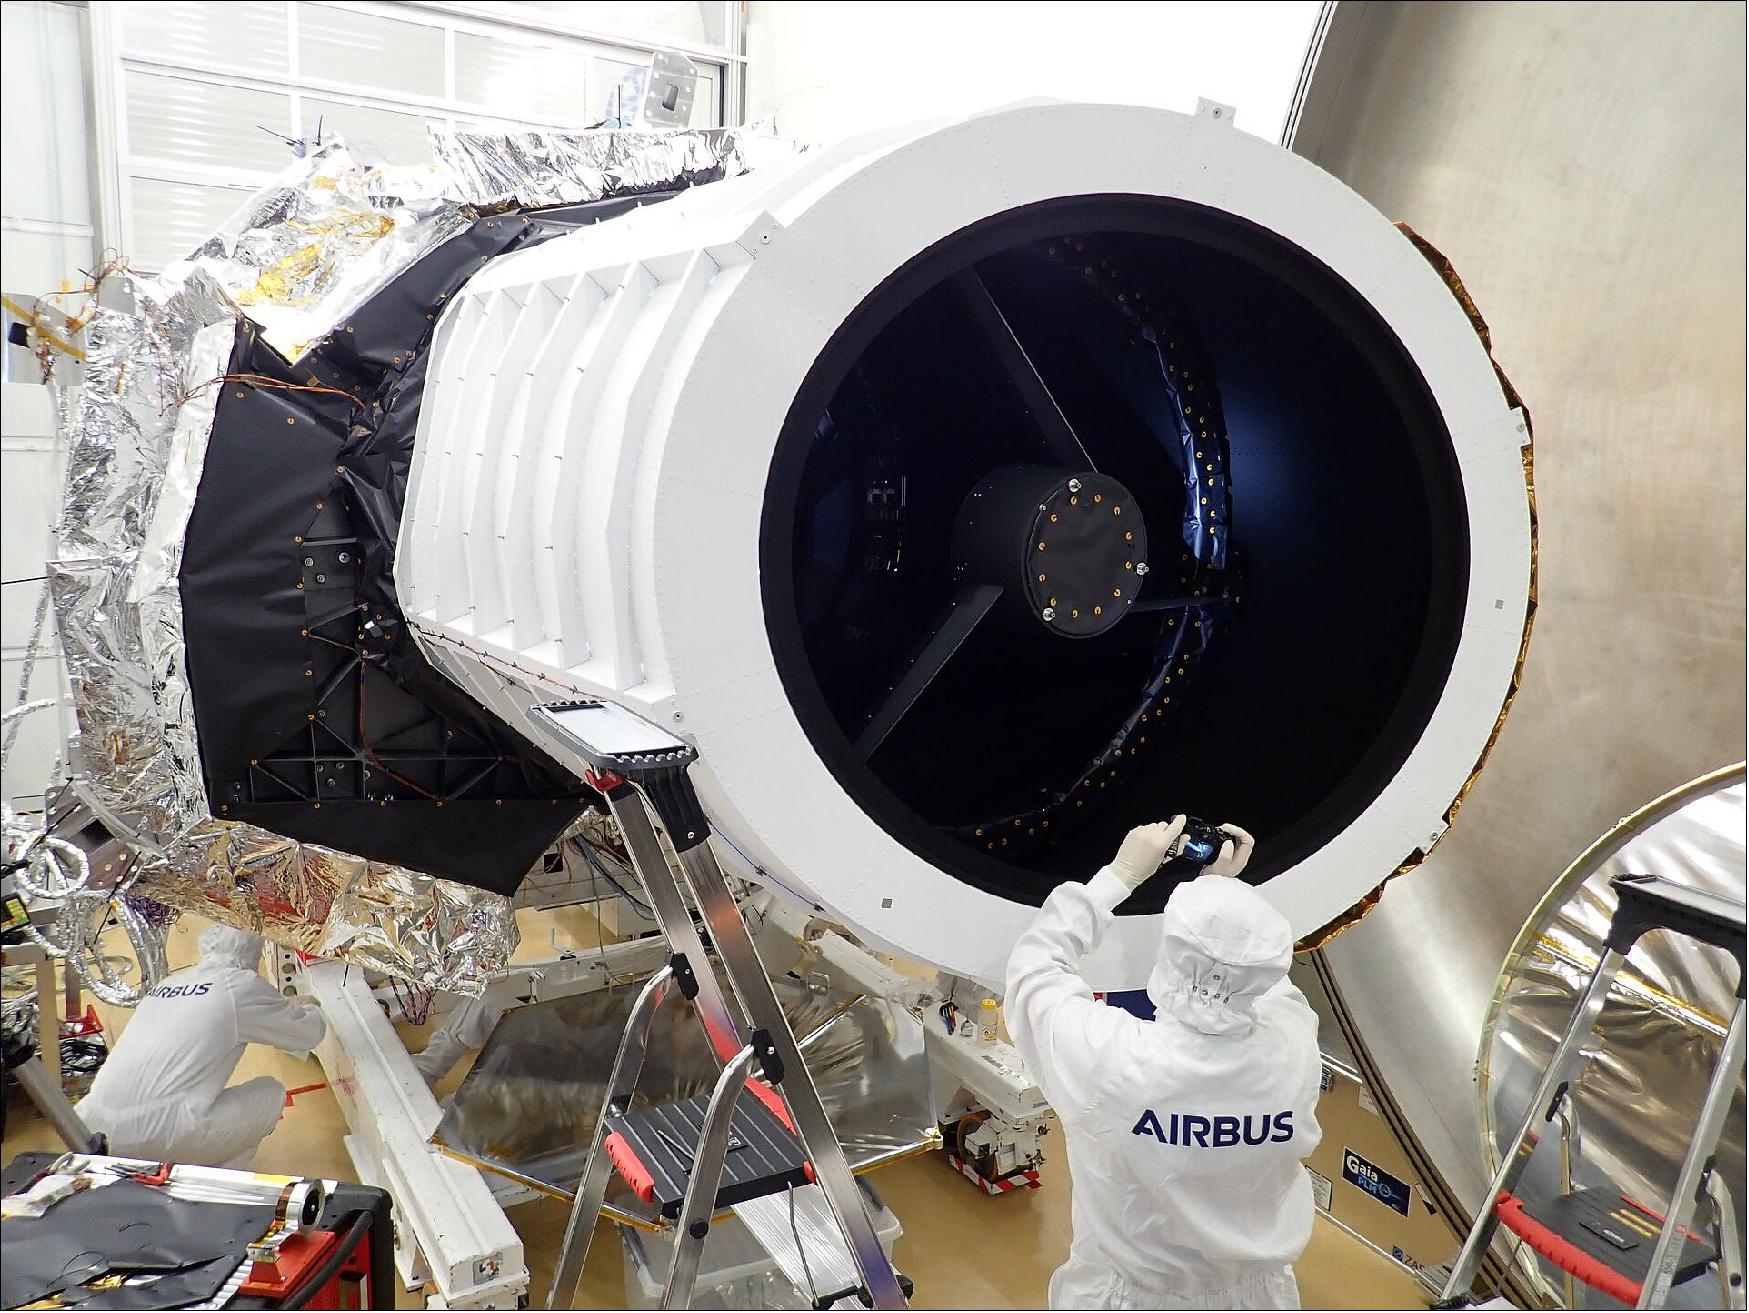 Figure 27: Here the payload module is shown, which contains the telescope and the scientific instruments. At Centre Spatial de Liège (CSL) in Belgium, the telescope and instruments successfully passed tests to show that they can operate in extreme space environments (image credit: ESA)